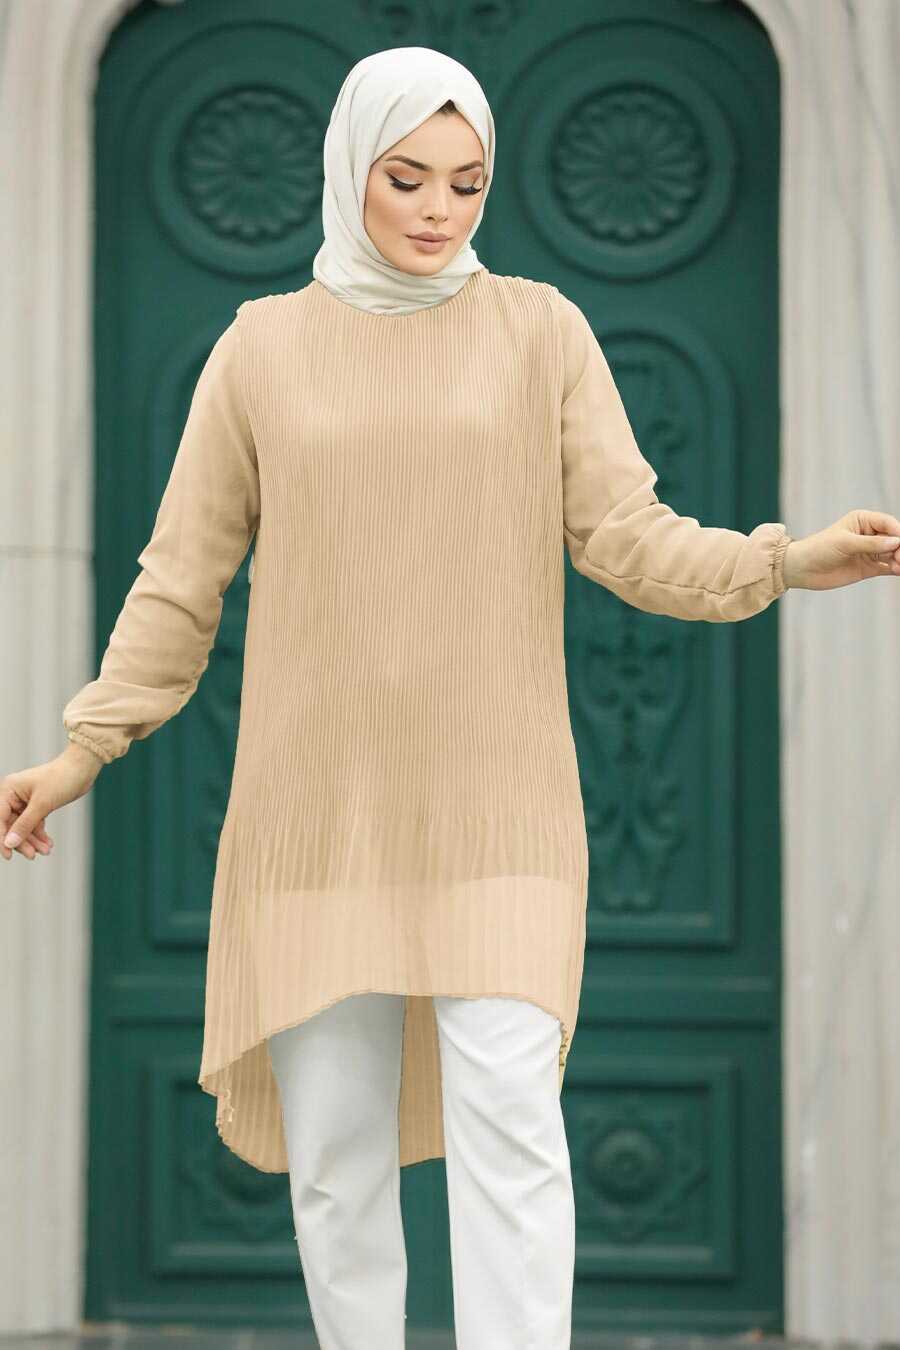 Neva Style - Biscuit Hijab For Women Tunic 91235BS